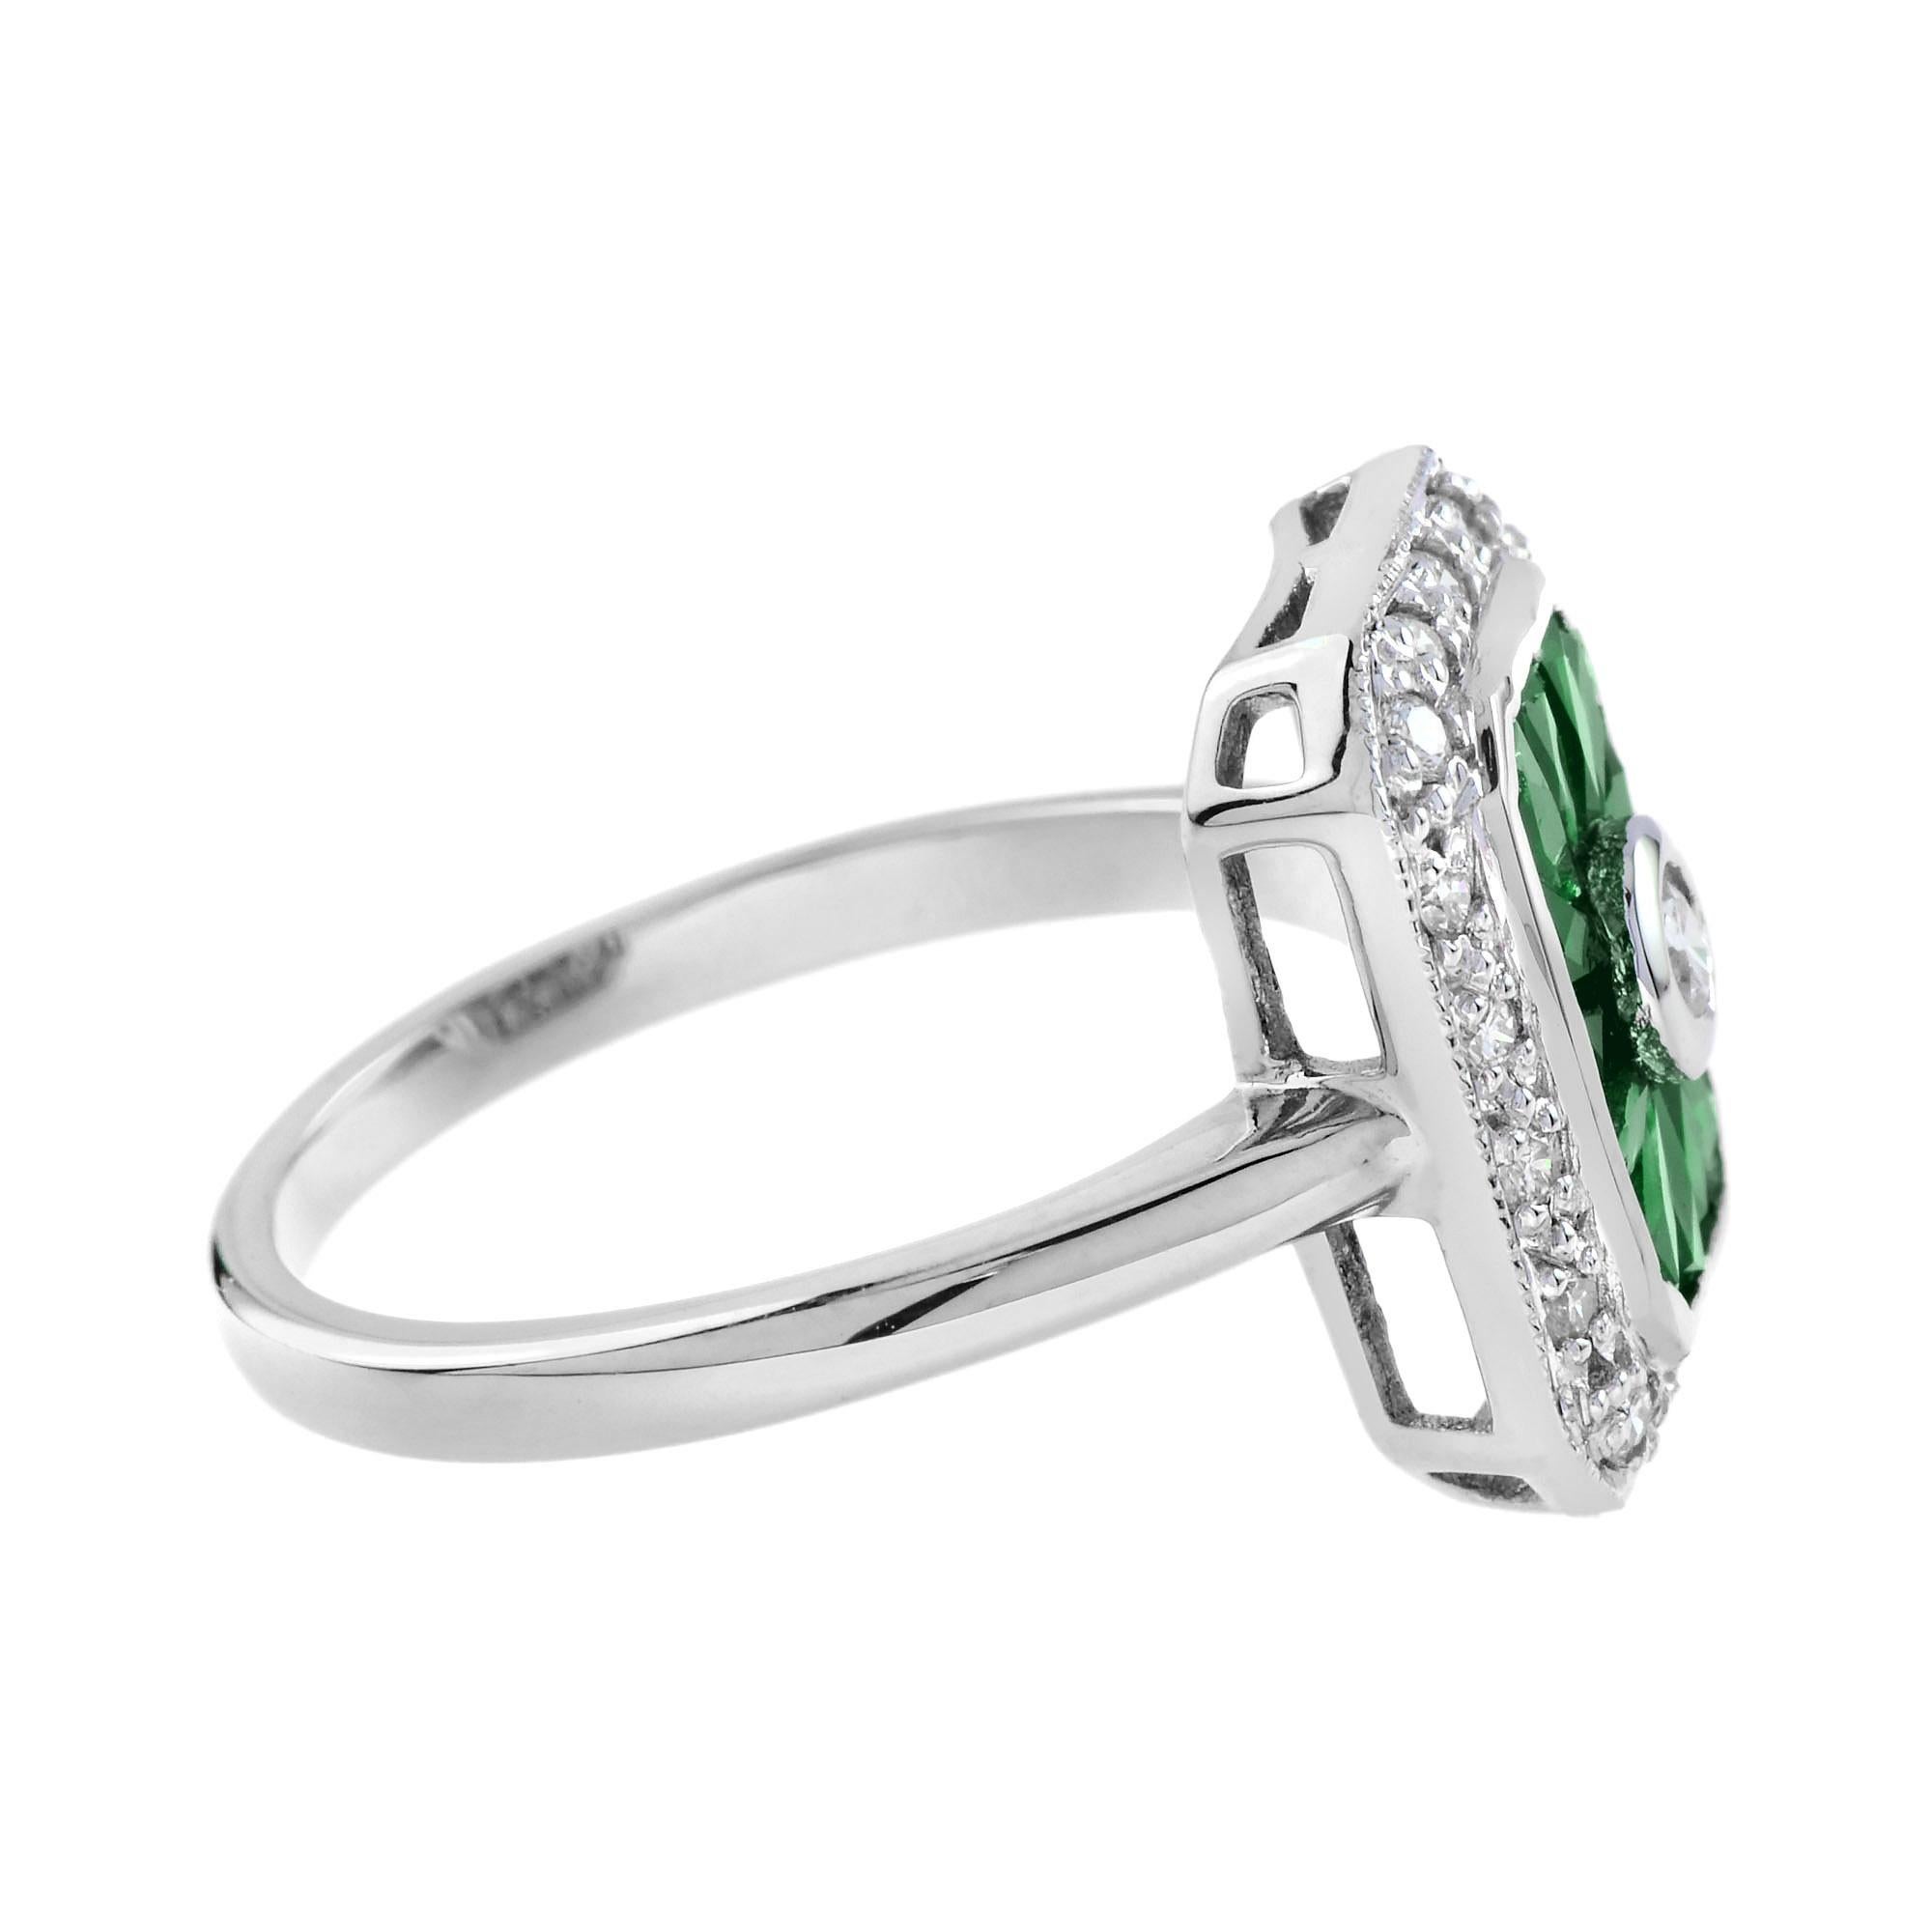 For Sale:  Diamond and Emerald Halo Art Deco Style Engagement Ring in 14K White Gold 4